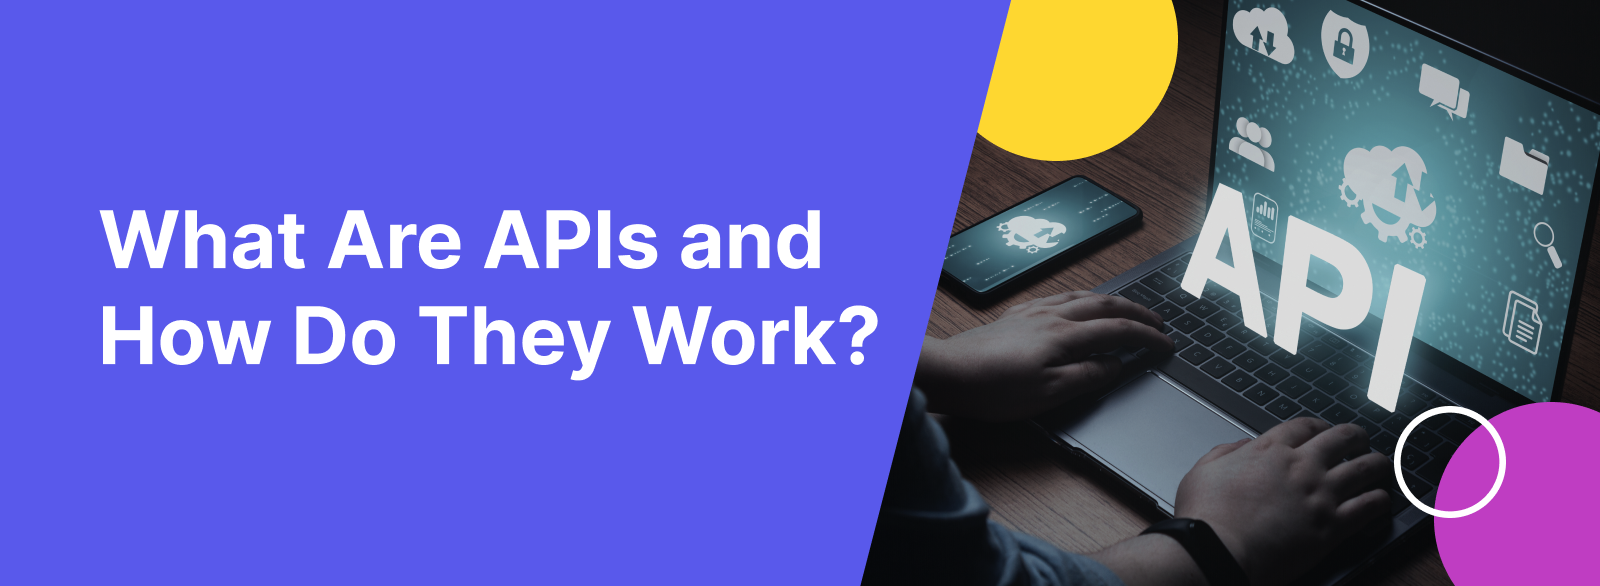 API Examples banner